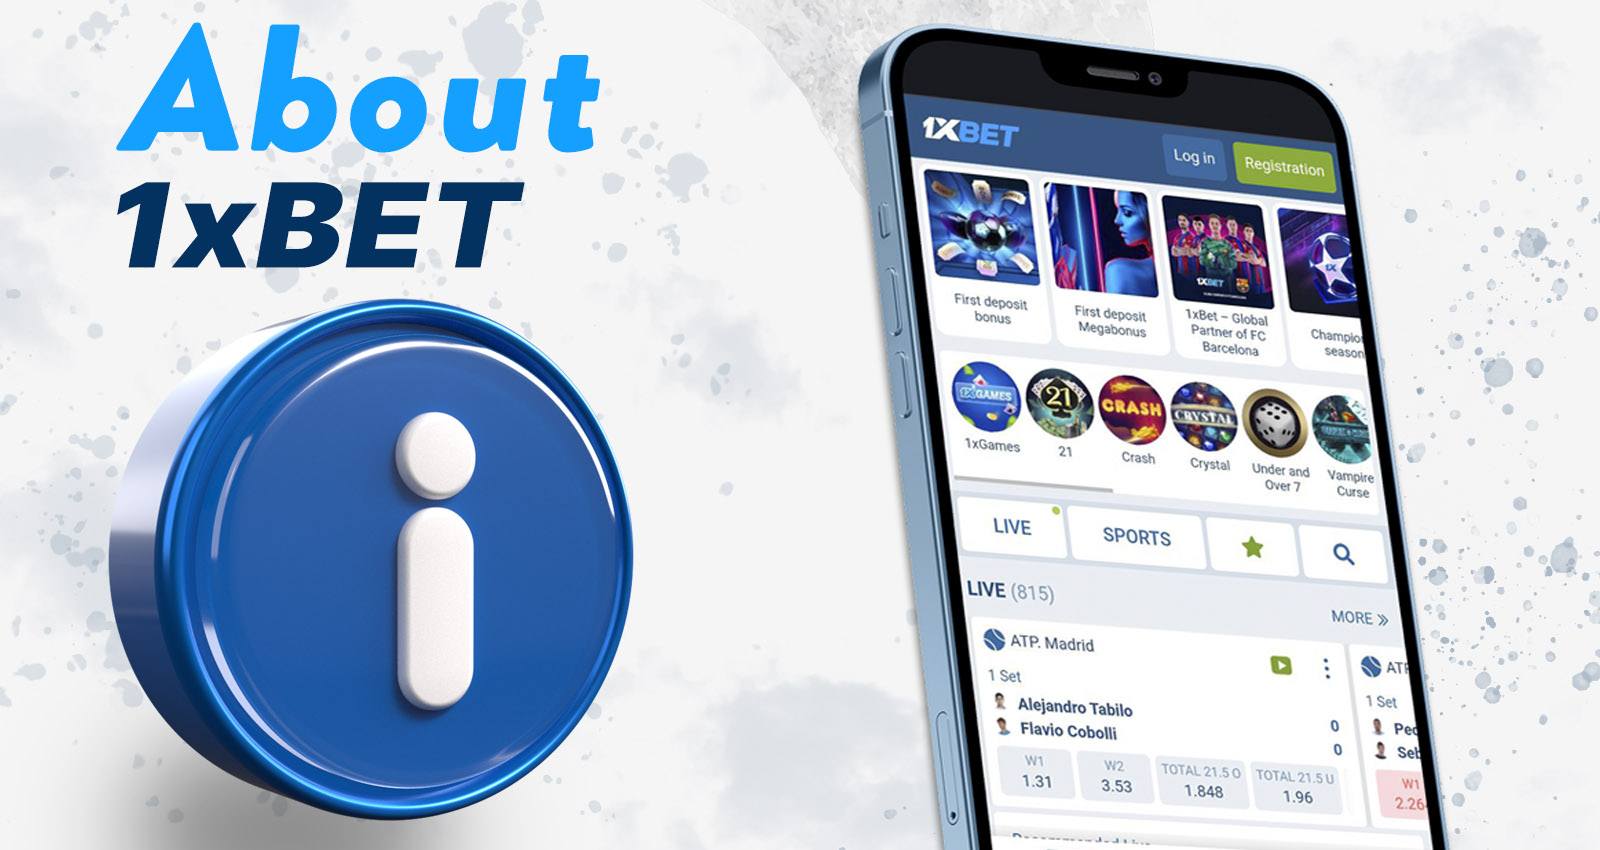 About 1xBet platform from Bangladesh